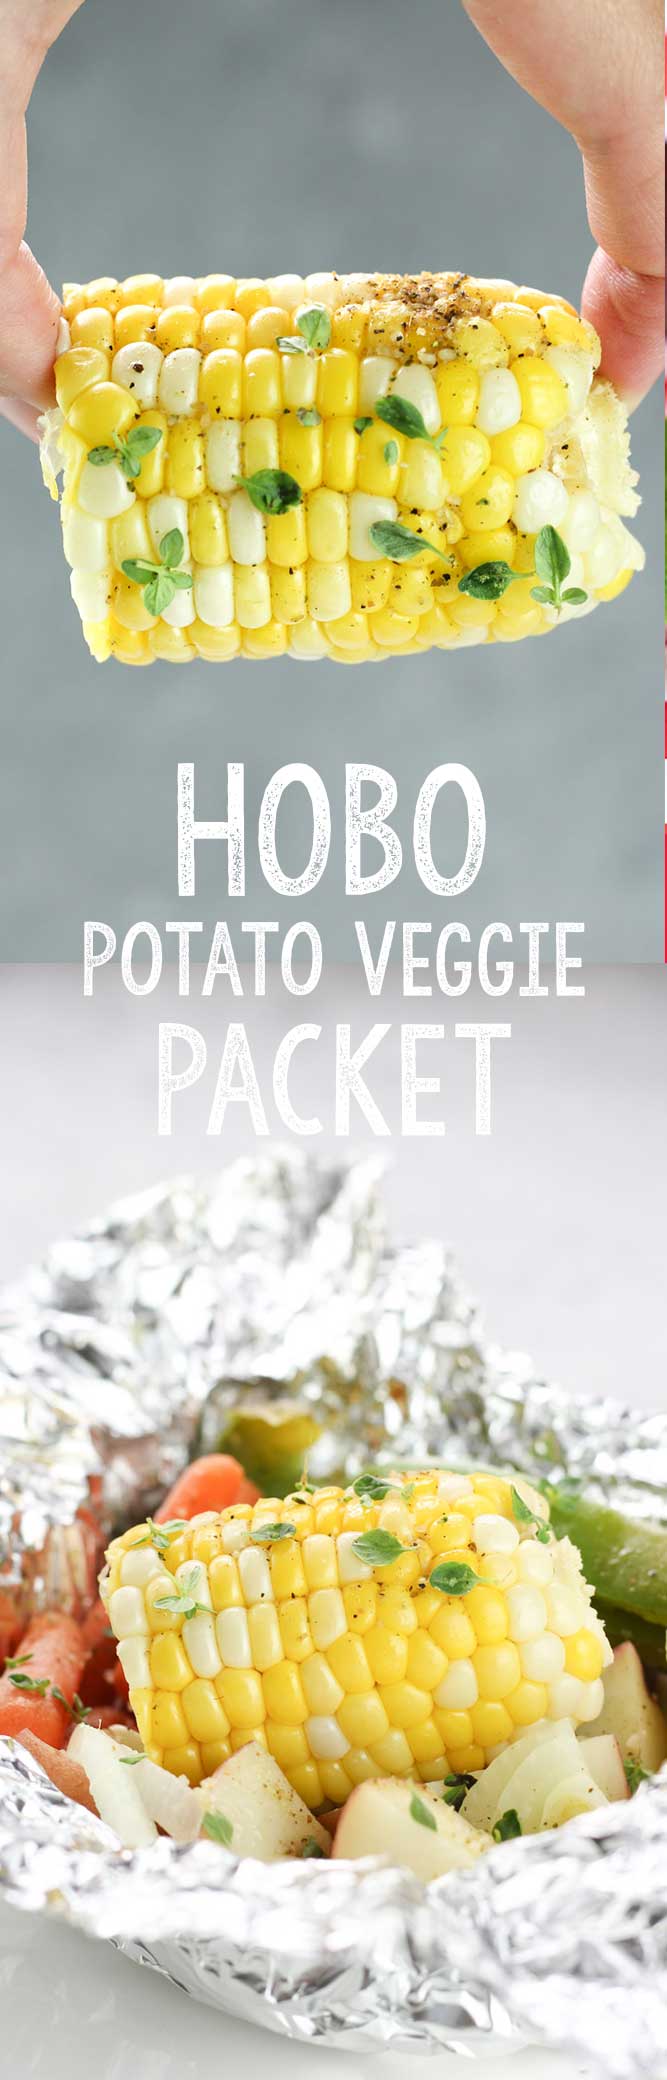 A hobo potato veggie packet is the perfect foil dinner or side dish!